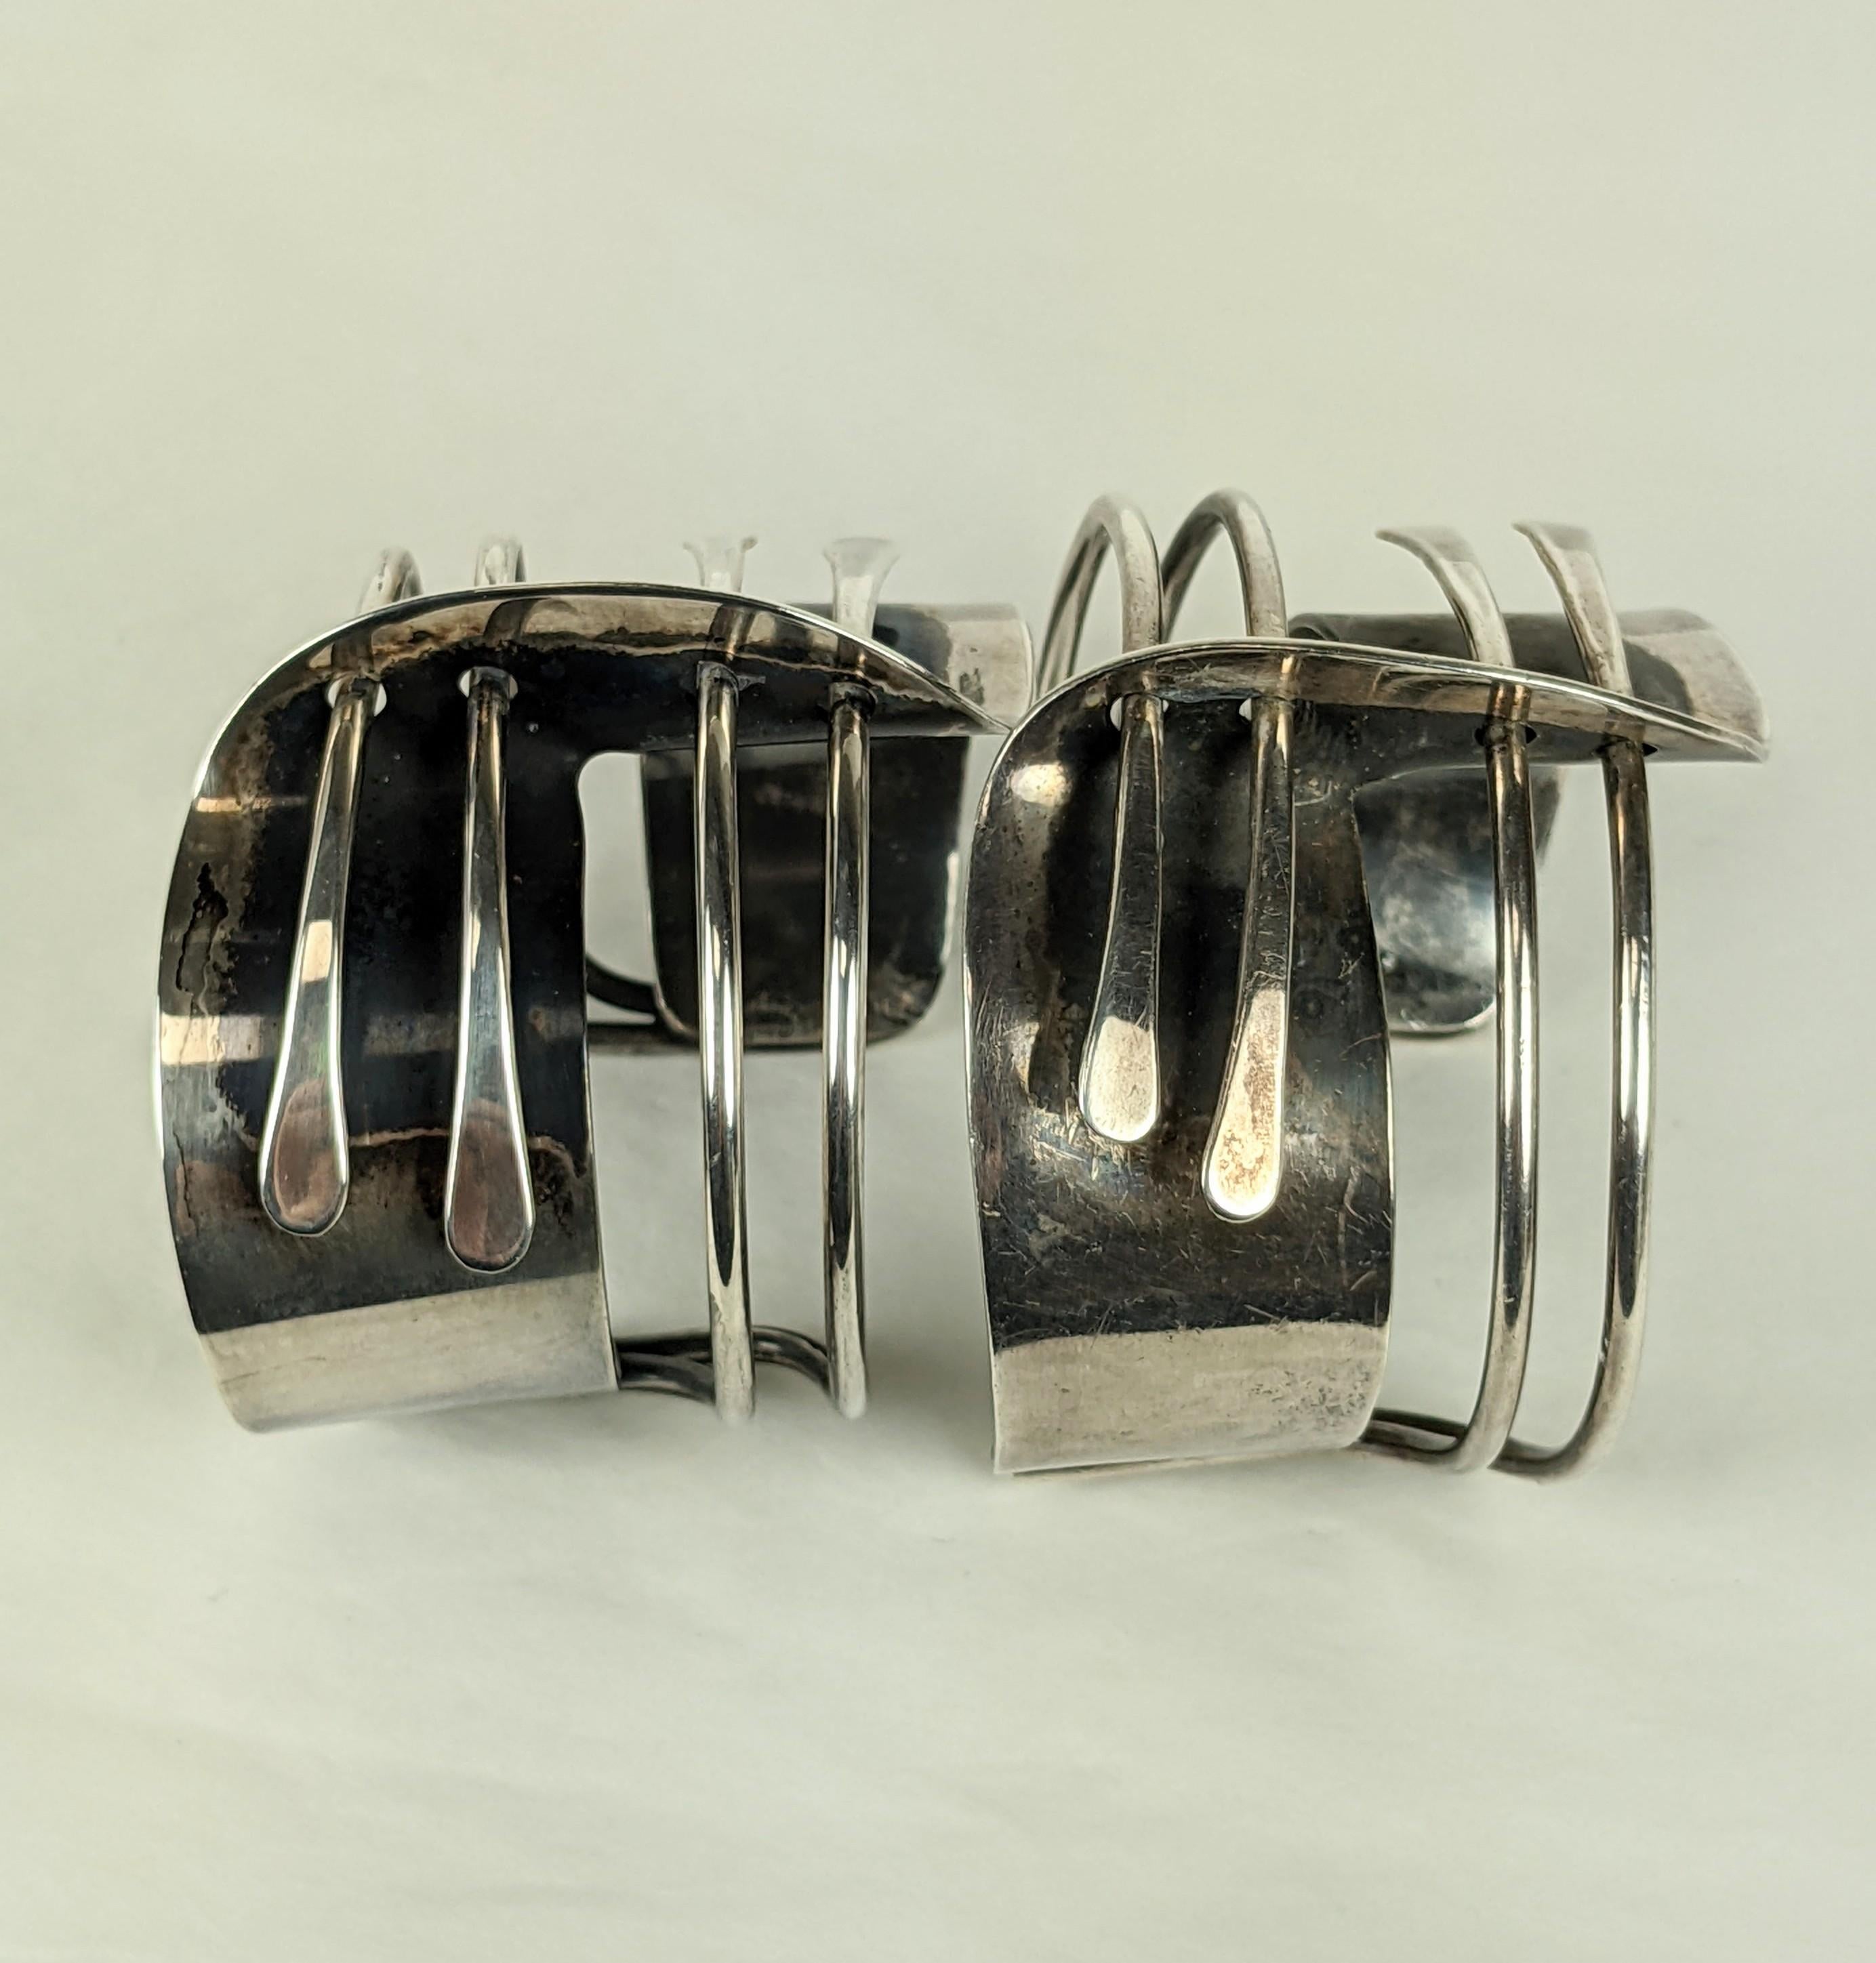 Modernist Pair of Iconic Art Smith Modernette Cuffs For Sale